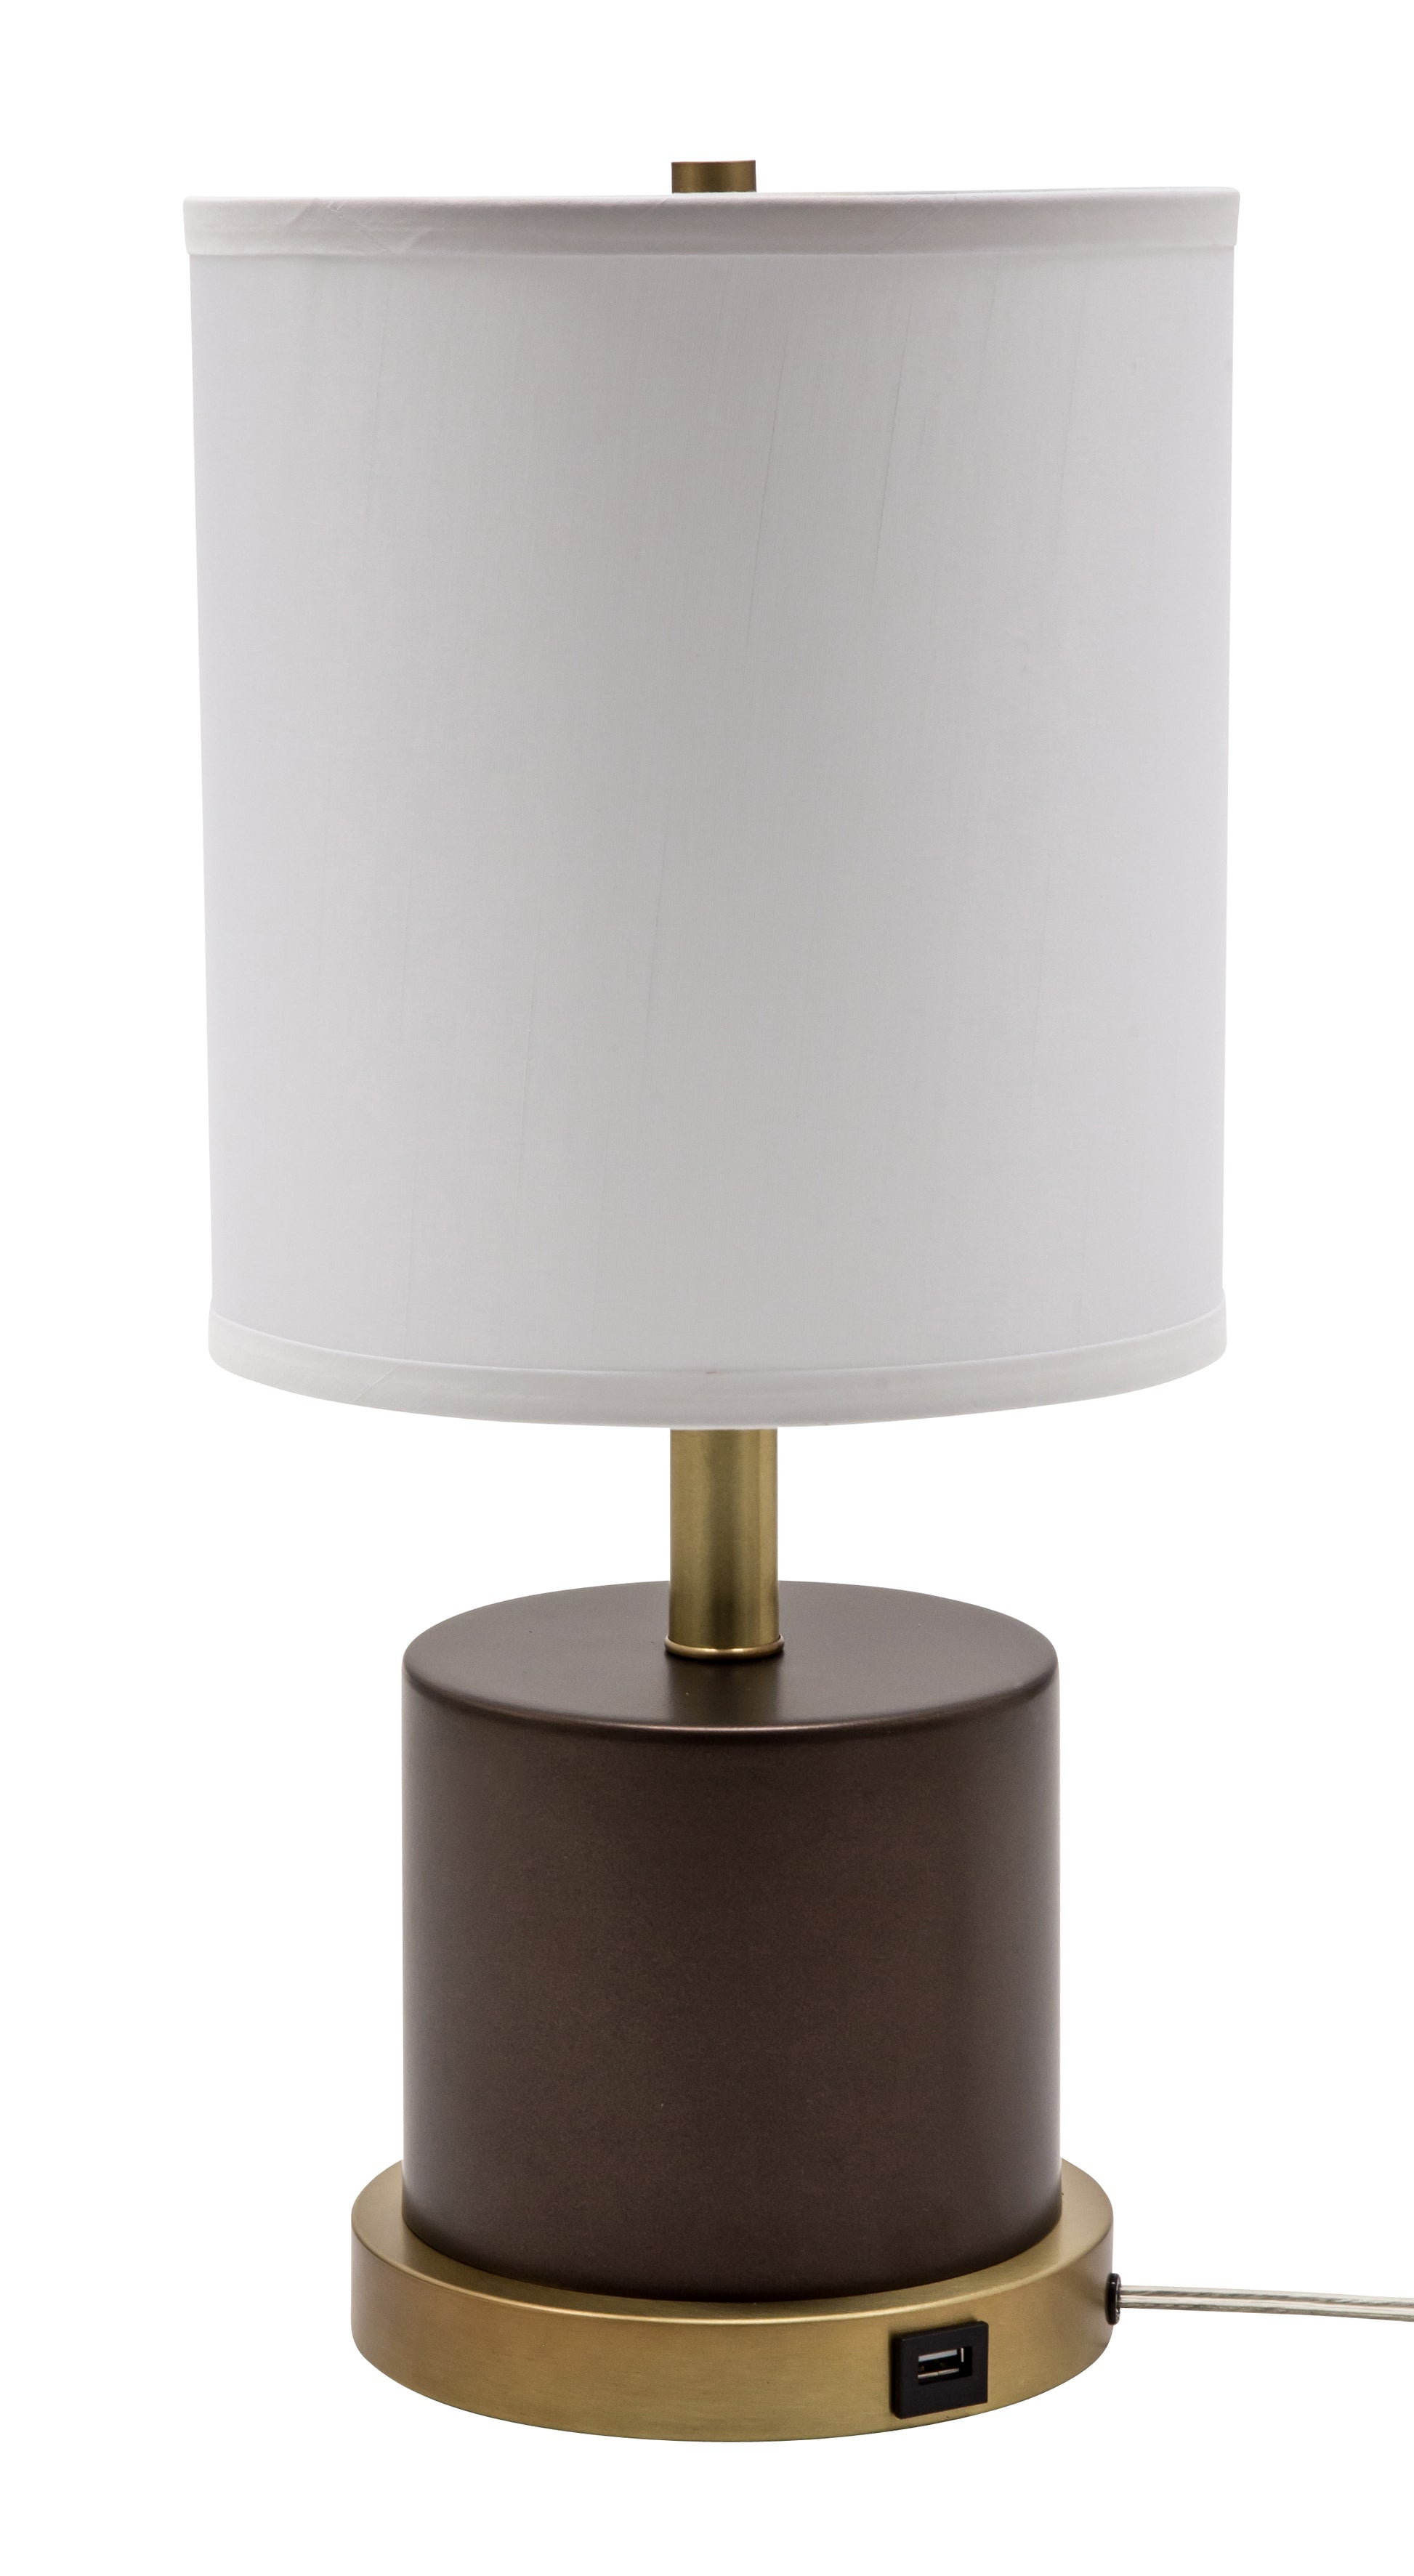 House of Troy Rupert Table Lamp Chestnut Bronze Weathered Brass Accents USB Port RU752-CHB